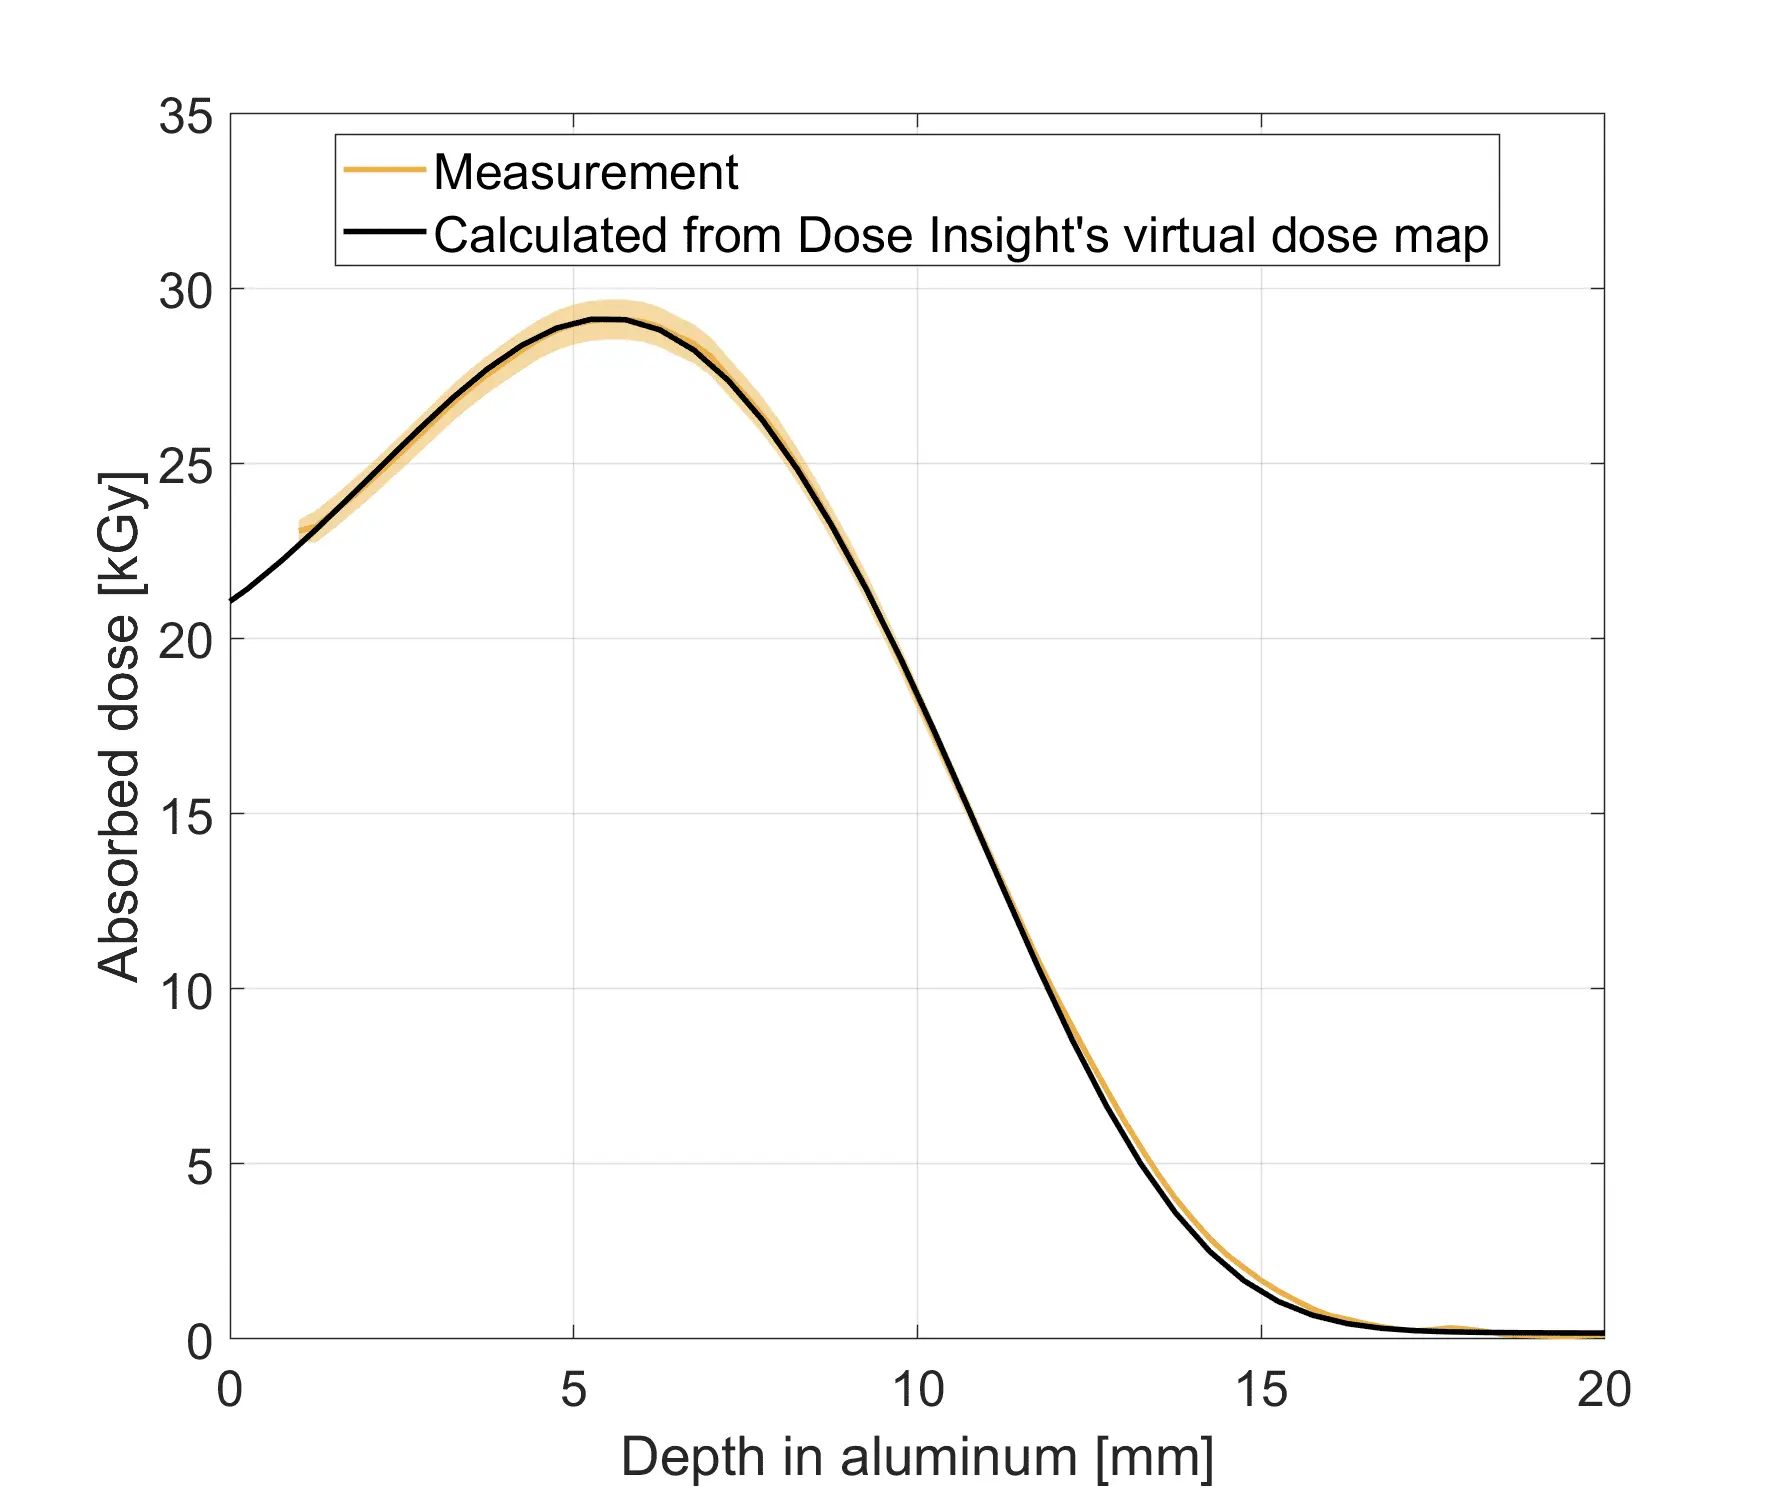 Aluminum dose-depth profile as measured at an e-beam sterilizer and simulated by Dose Insight's virtual dose mapping tool